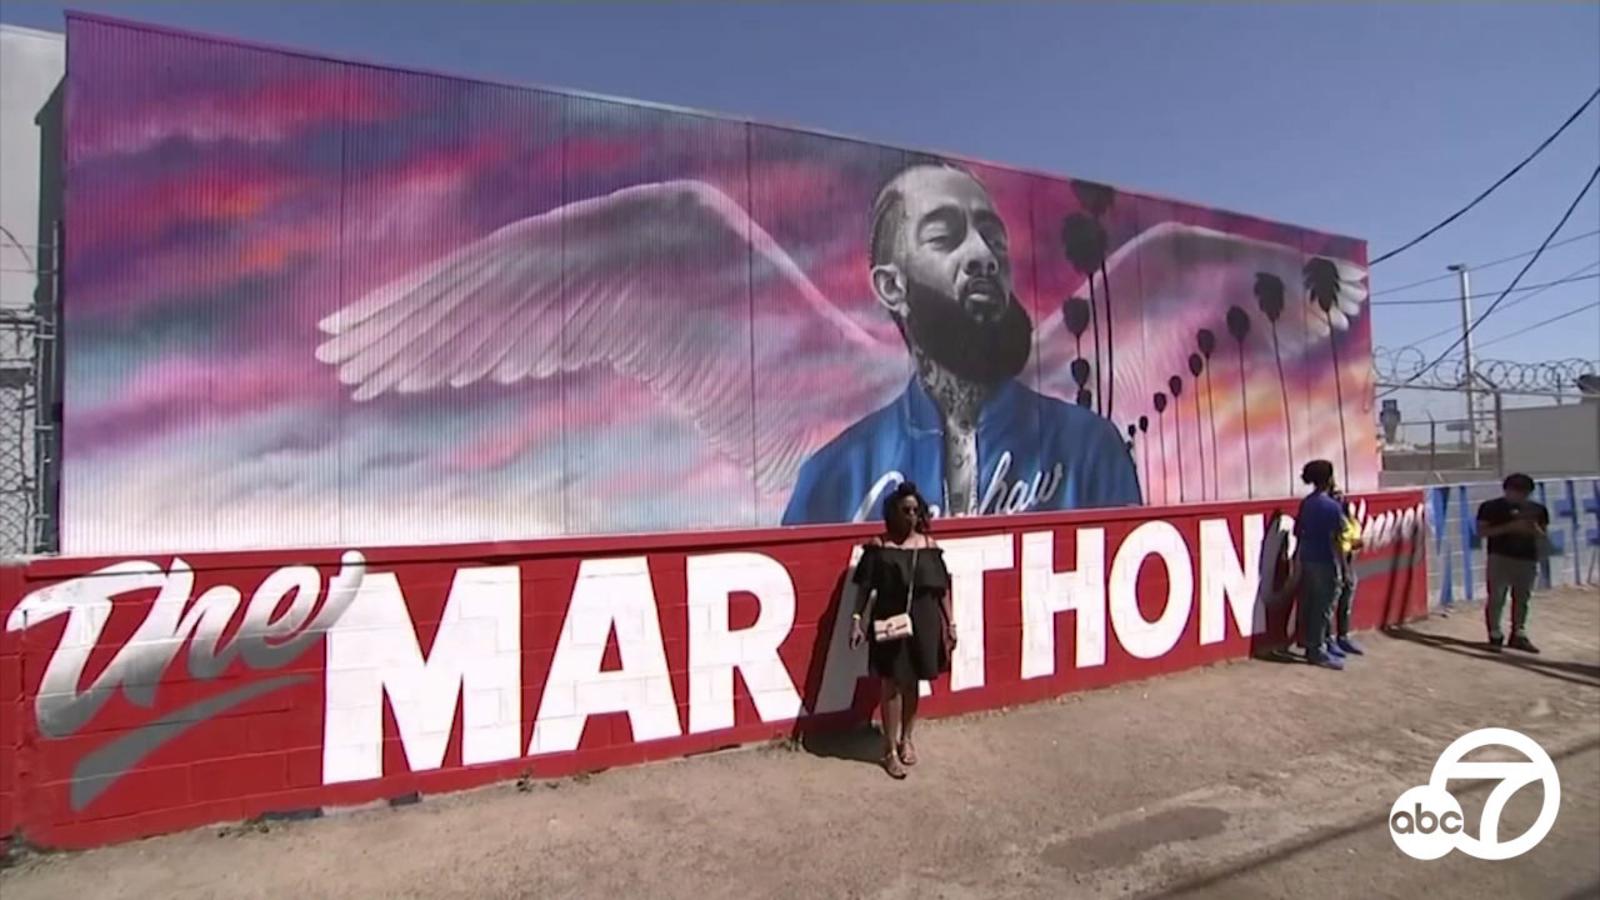 Street art of Nipsey Hussle in LA breathes life into legacy